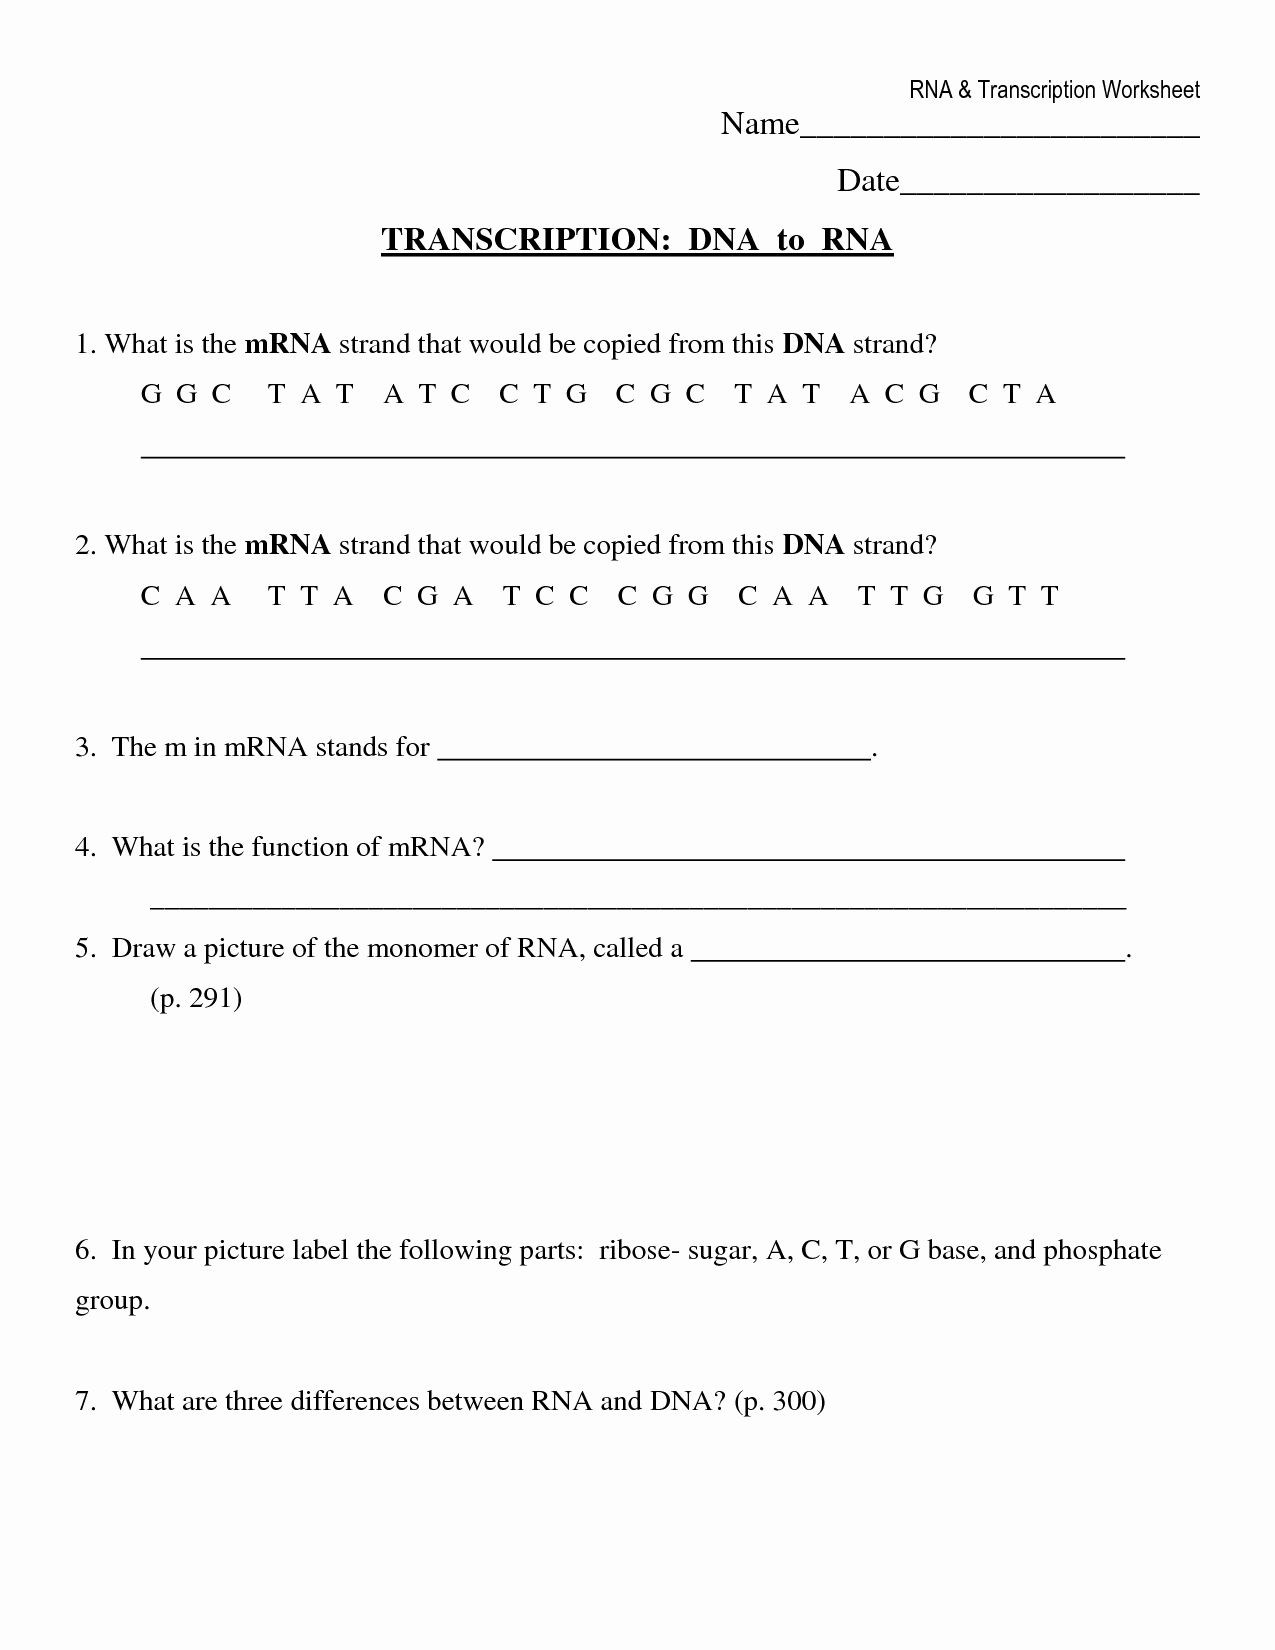 Dna Transcription and Translation Worksheet 50 Dna and Rna Worksheet Answers In 2020 with Images